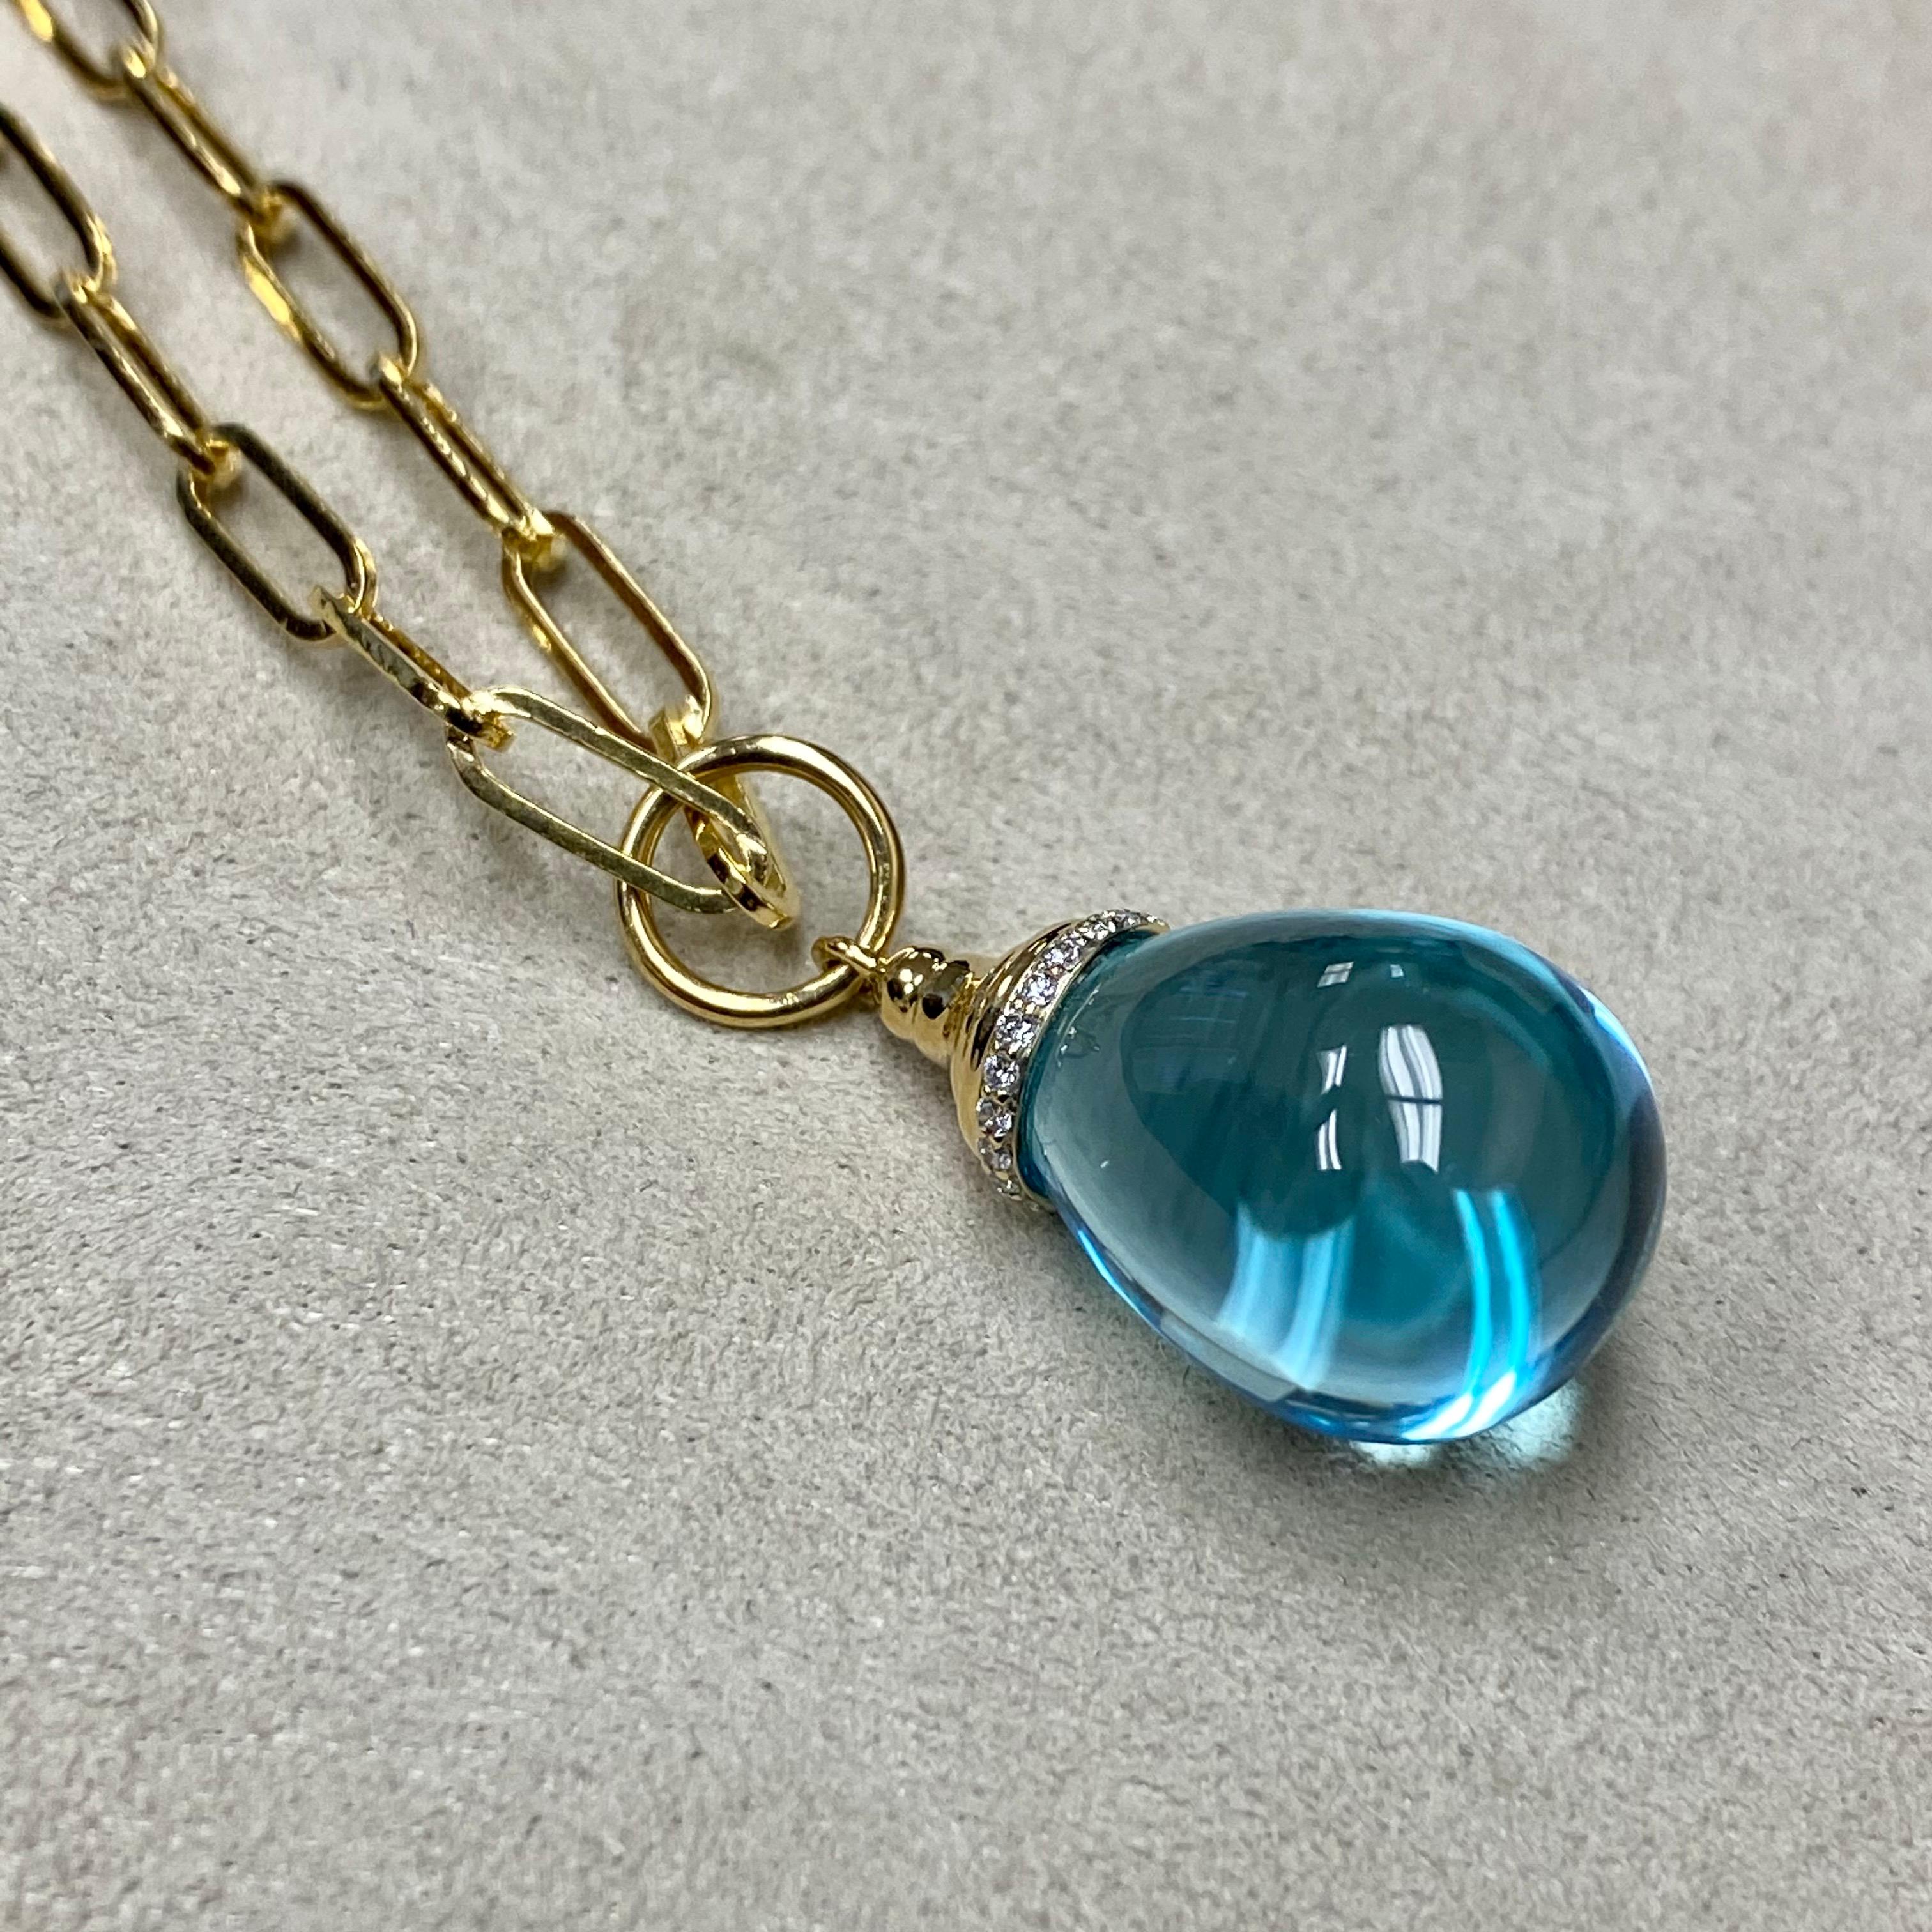 Created in 18 karat yellow gold 
Blue Topaz 20 carats minimum
Diamonds 0.10 carat approx.
Chain sold separately

Exquisitely crafted from 18-karat yellow gold, this captivating pendant features a stunning Blue Topaz of no less than 20 carats, plus